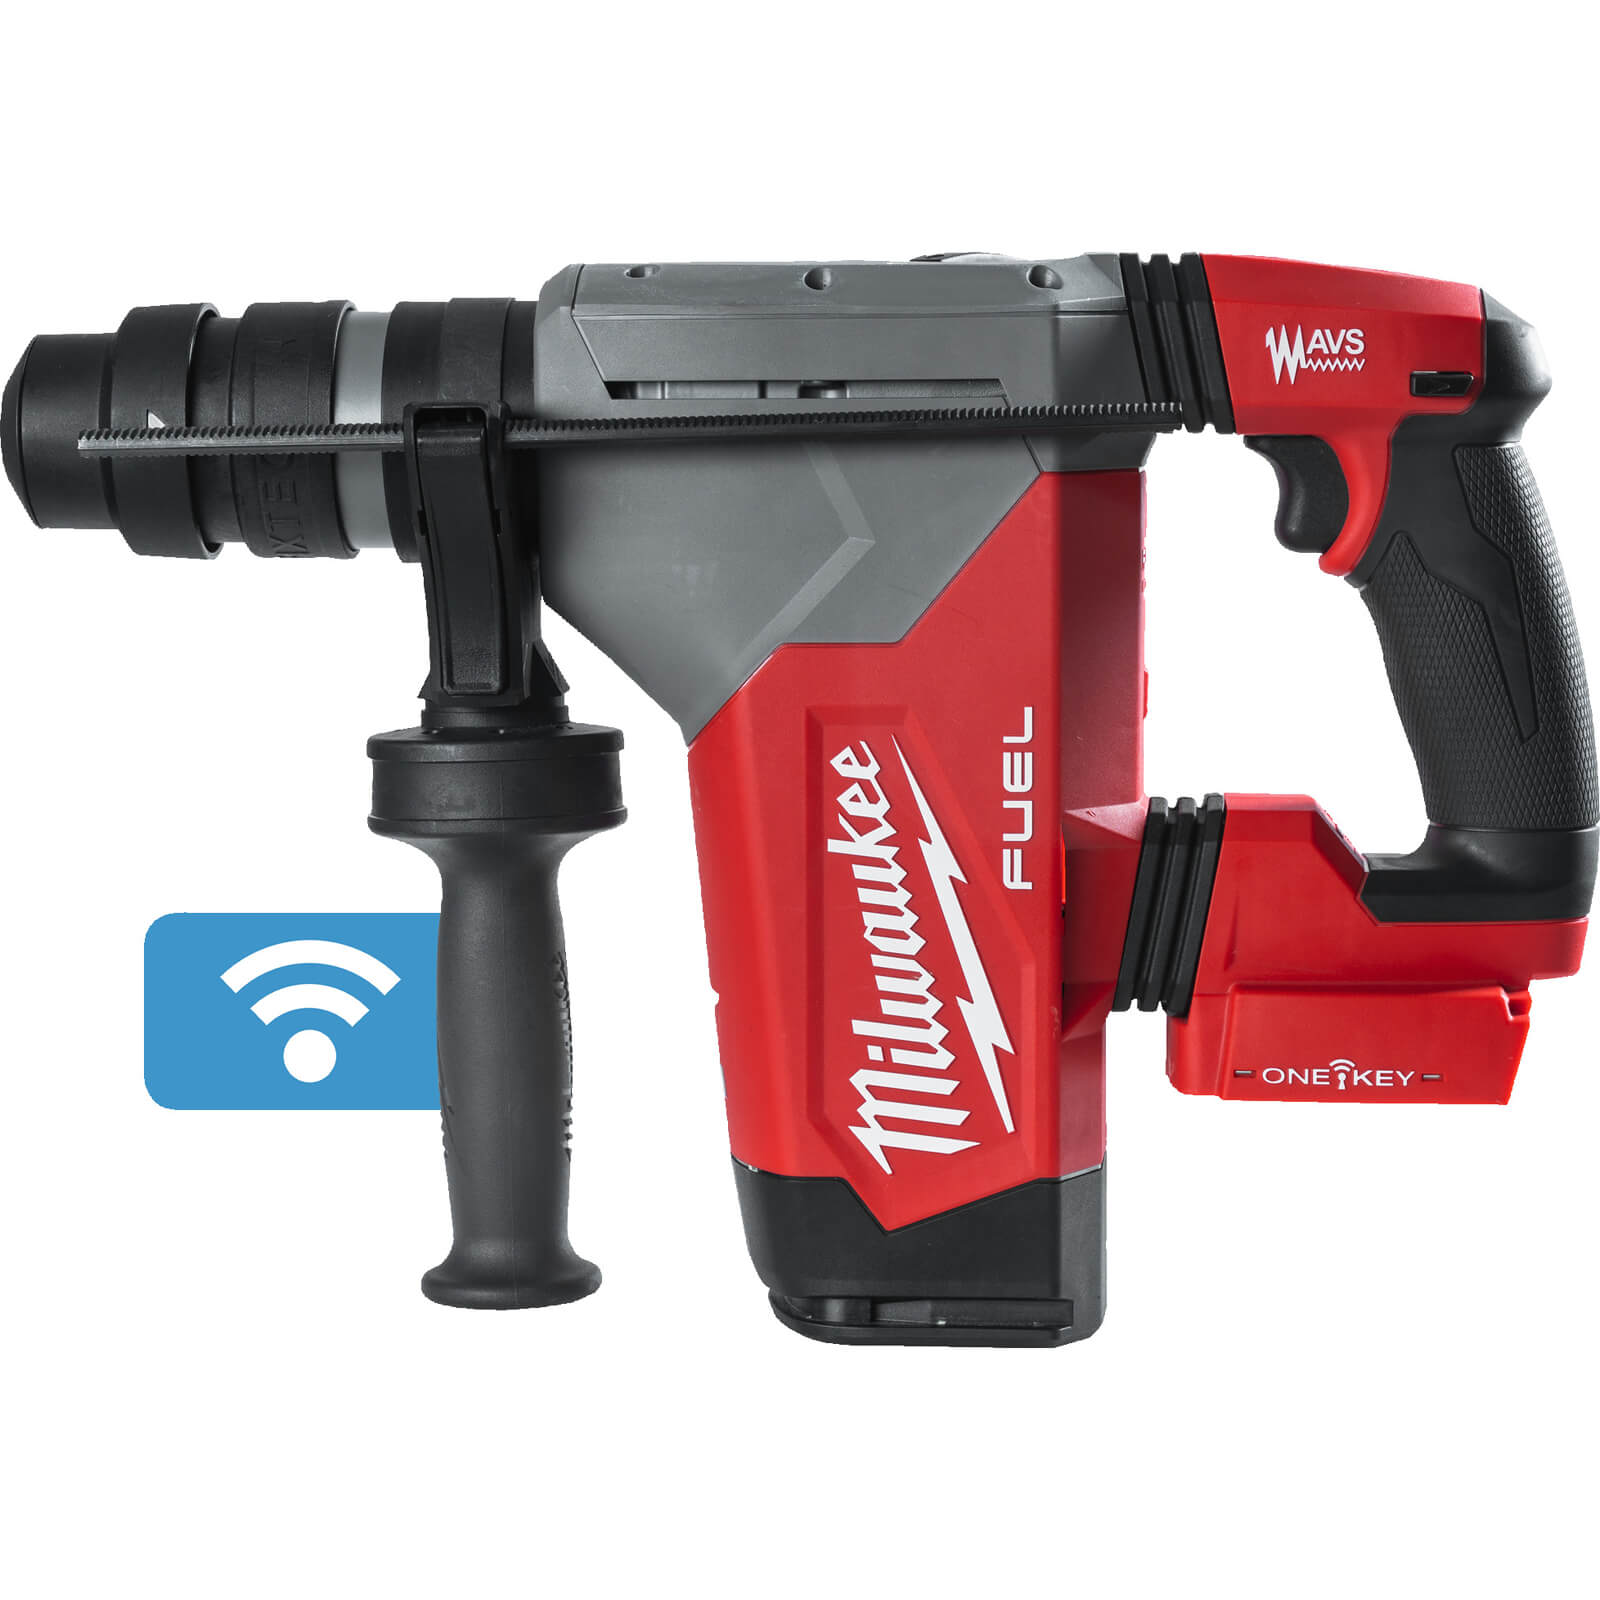 Image of Milwaukee M18 ONEFHPX Fuel 18v Cordless Brushless SDS Plus Drill No Batteries No Charger Case